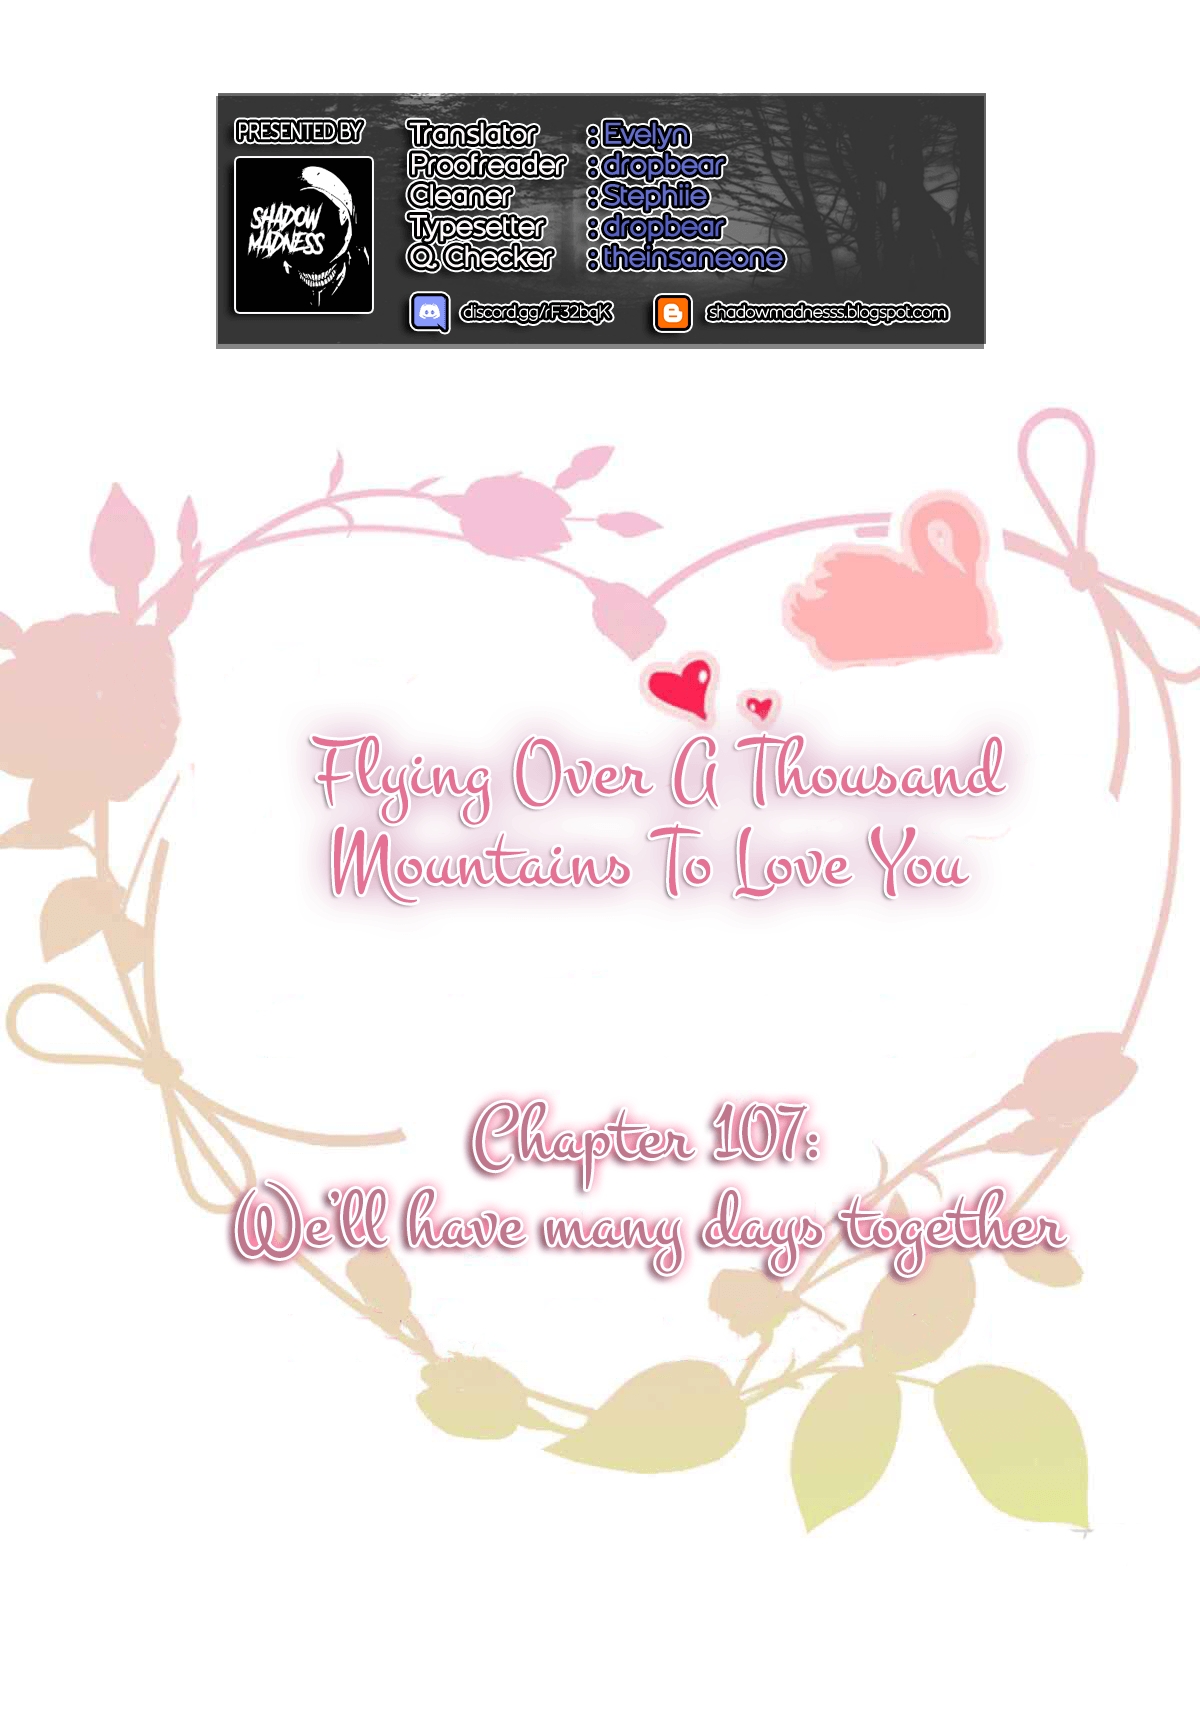 Flying Over a Thousand Mountains to Love You Ch. 107 We’ll have many days together